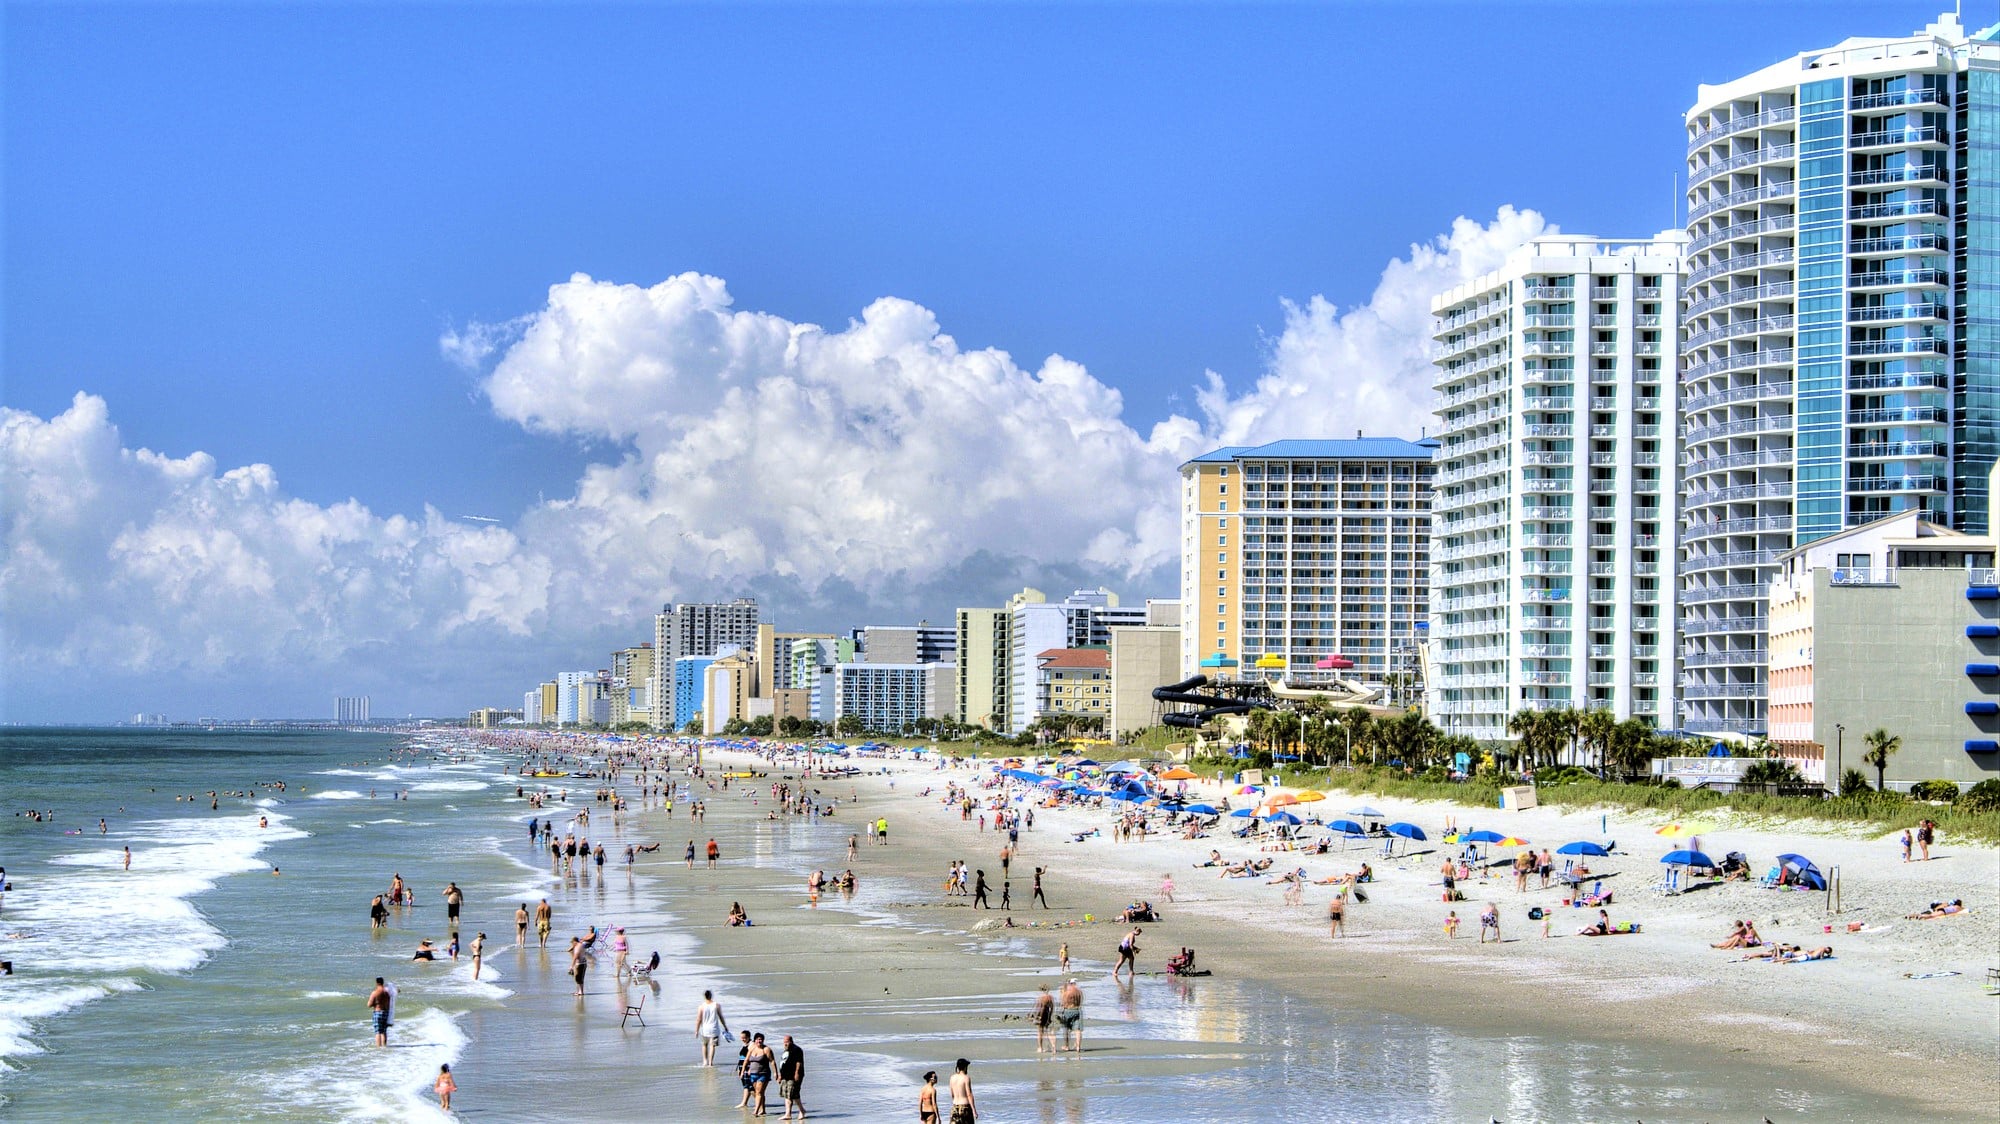 Coastal Condos Property Management and Vacation Rentals in North Myrtle Beach